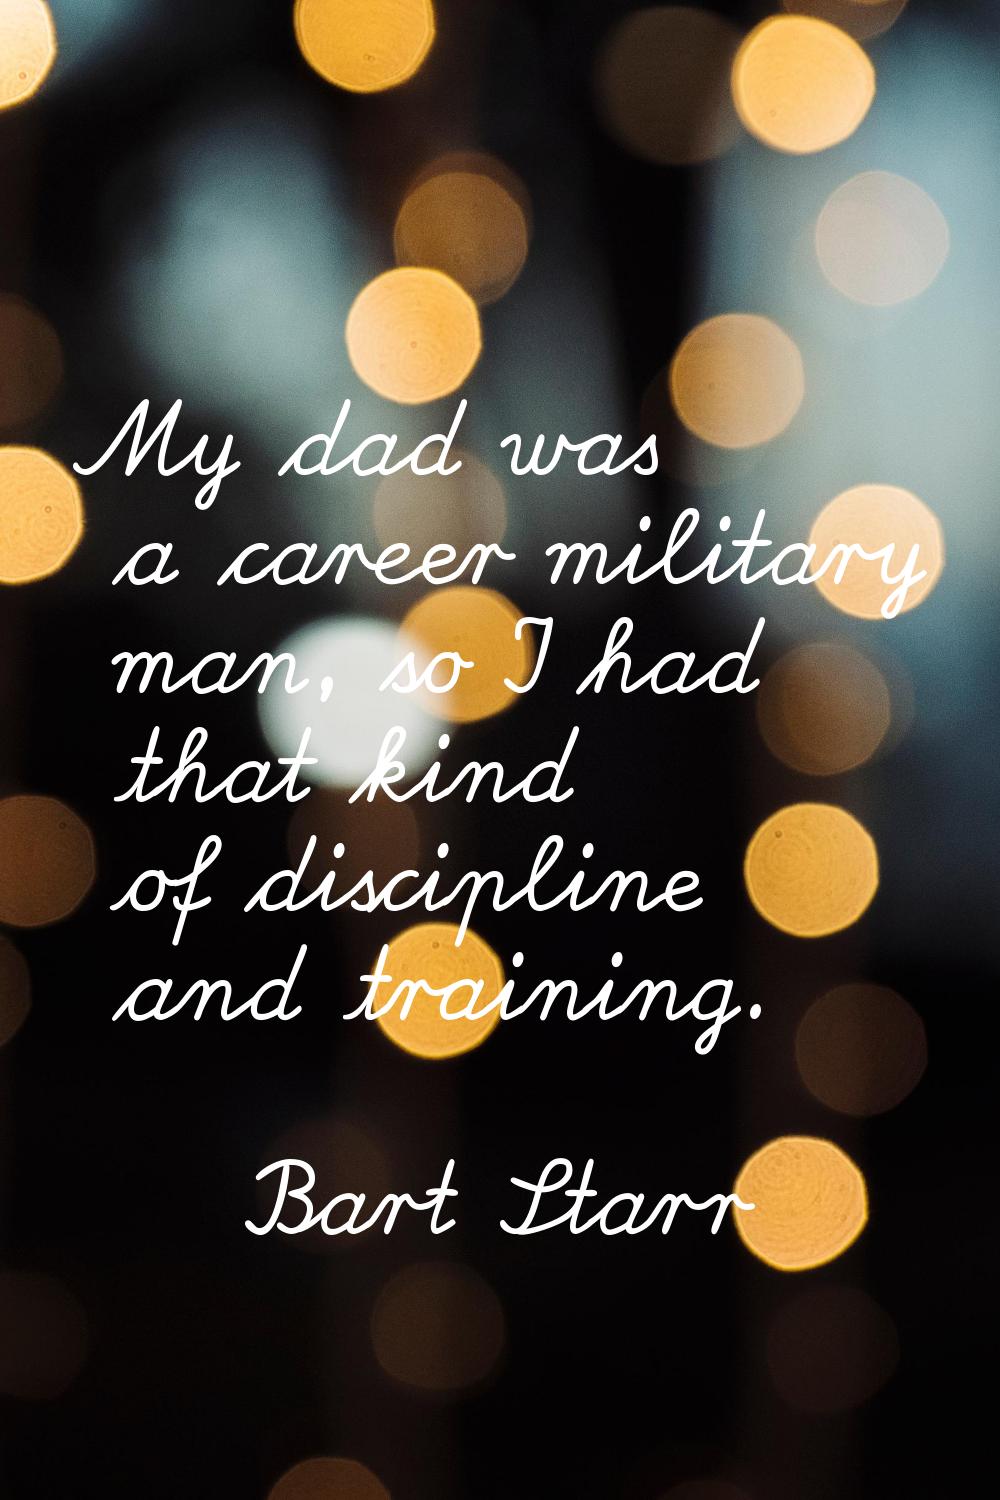 My dad was a career military man, so I had that kind of discipline and training.